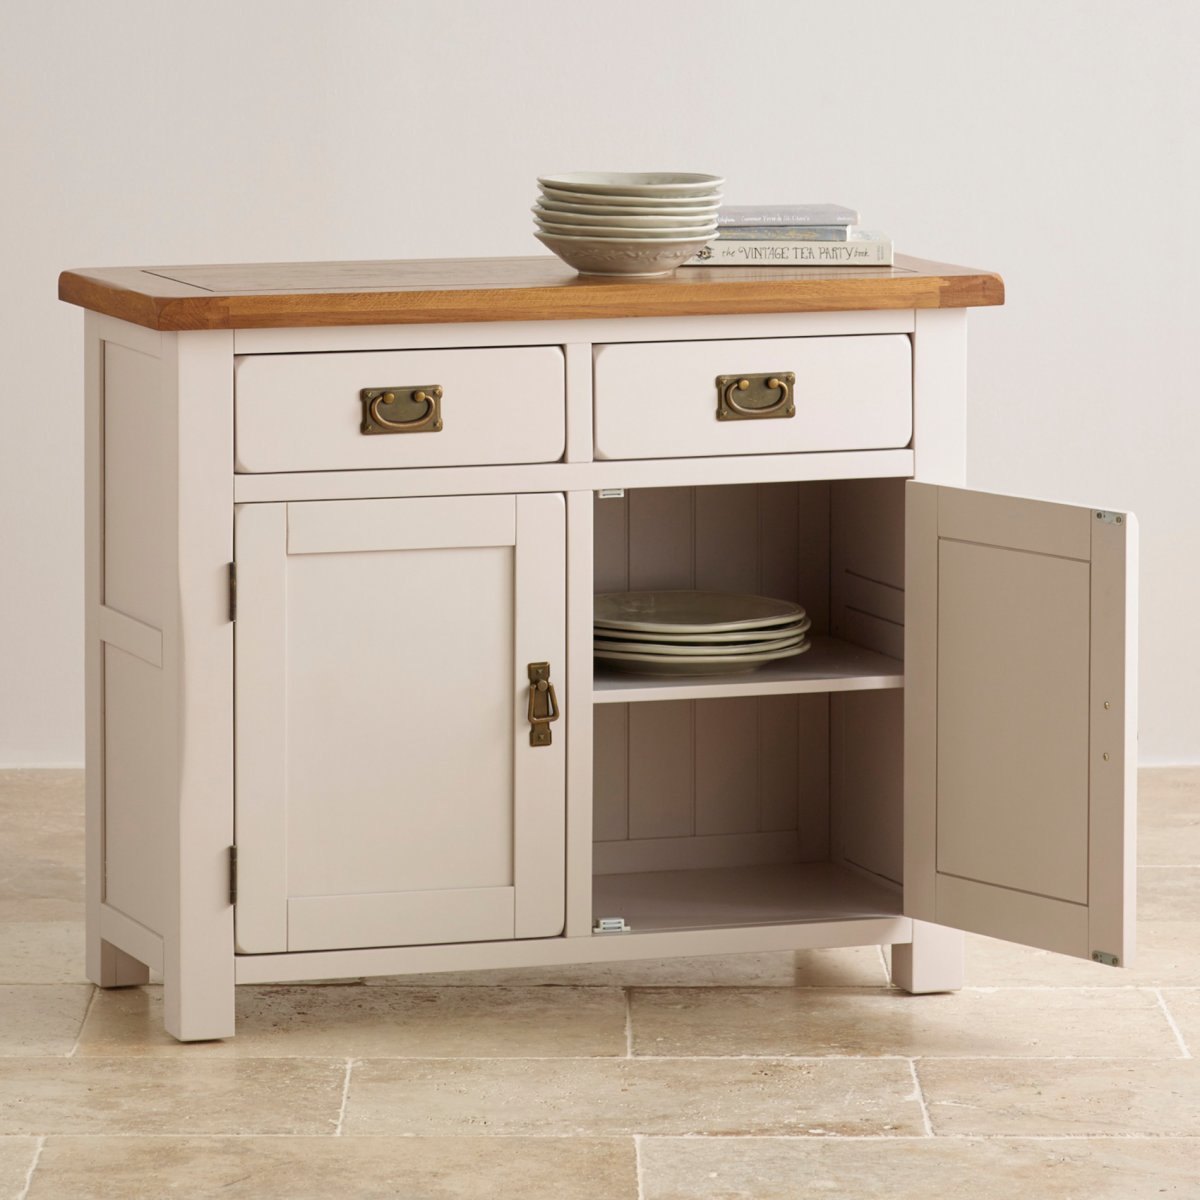 Kemble Small Painted Sideboard in Rustic Solid Oak